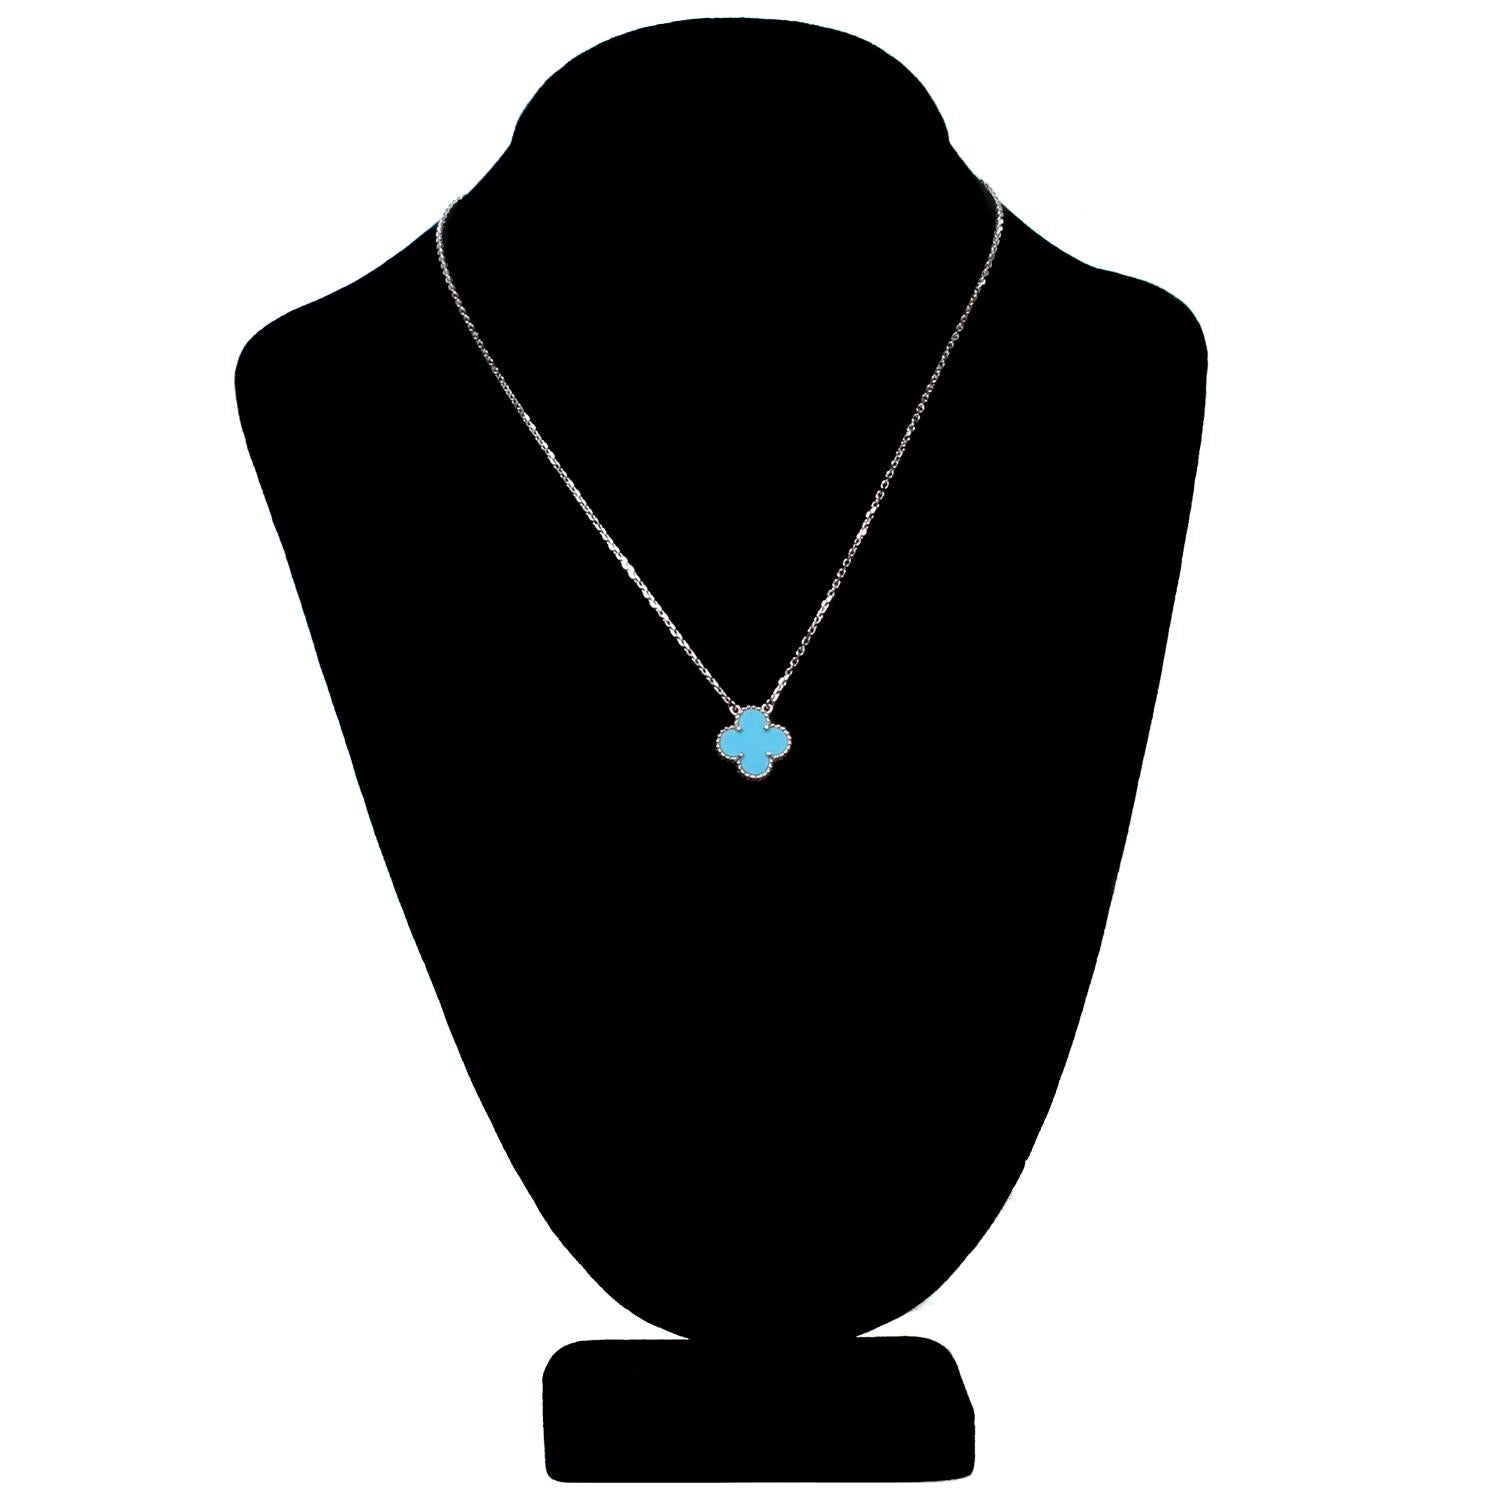 Women's Van Cleef & Arpels Alhambra Turquoise White Gold Pendant Necklace